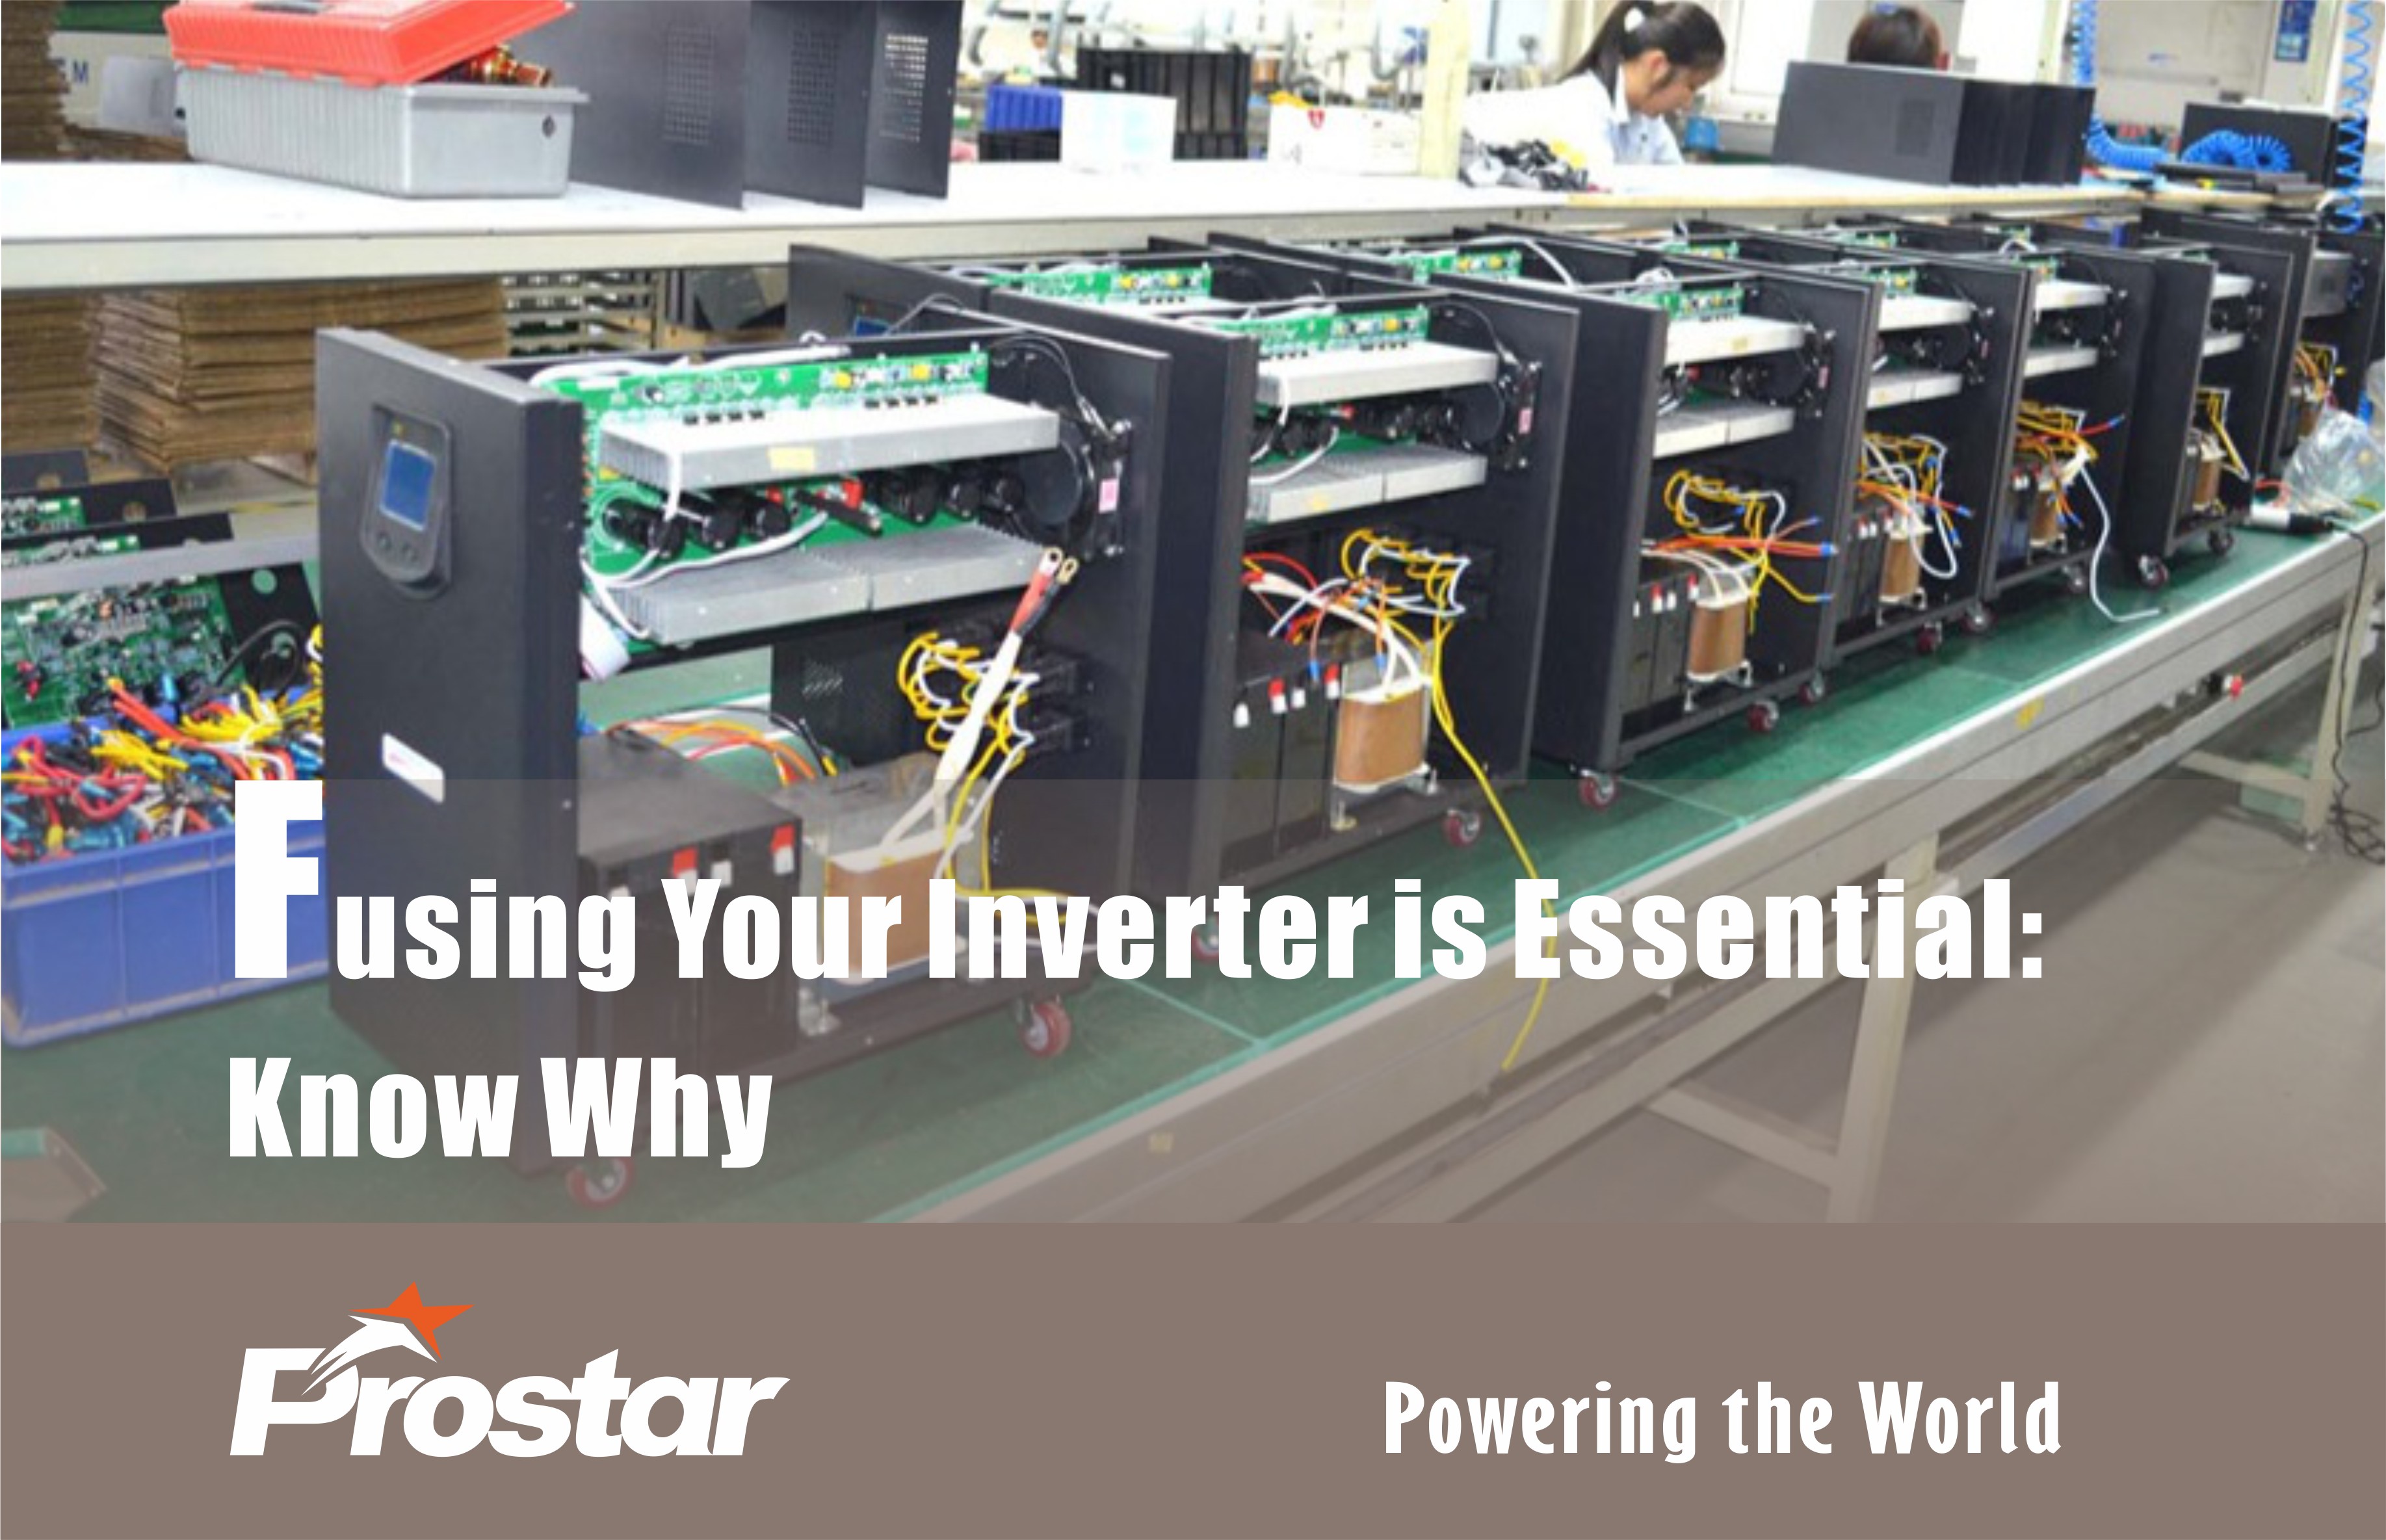 Fusing Your Inverter is Essential: Know Why